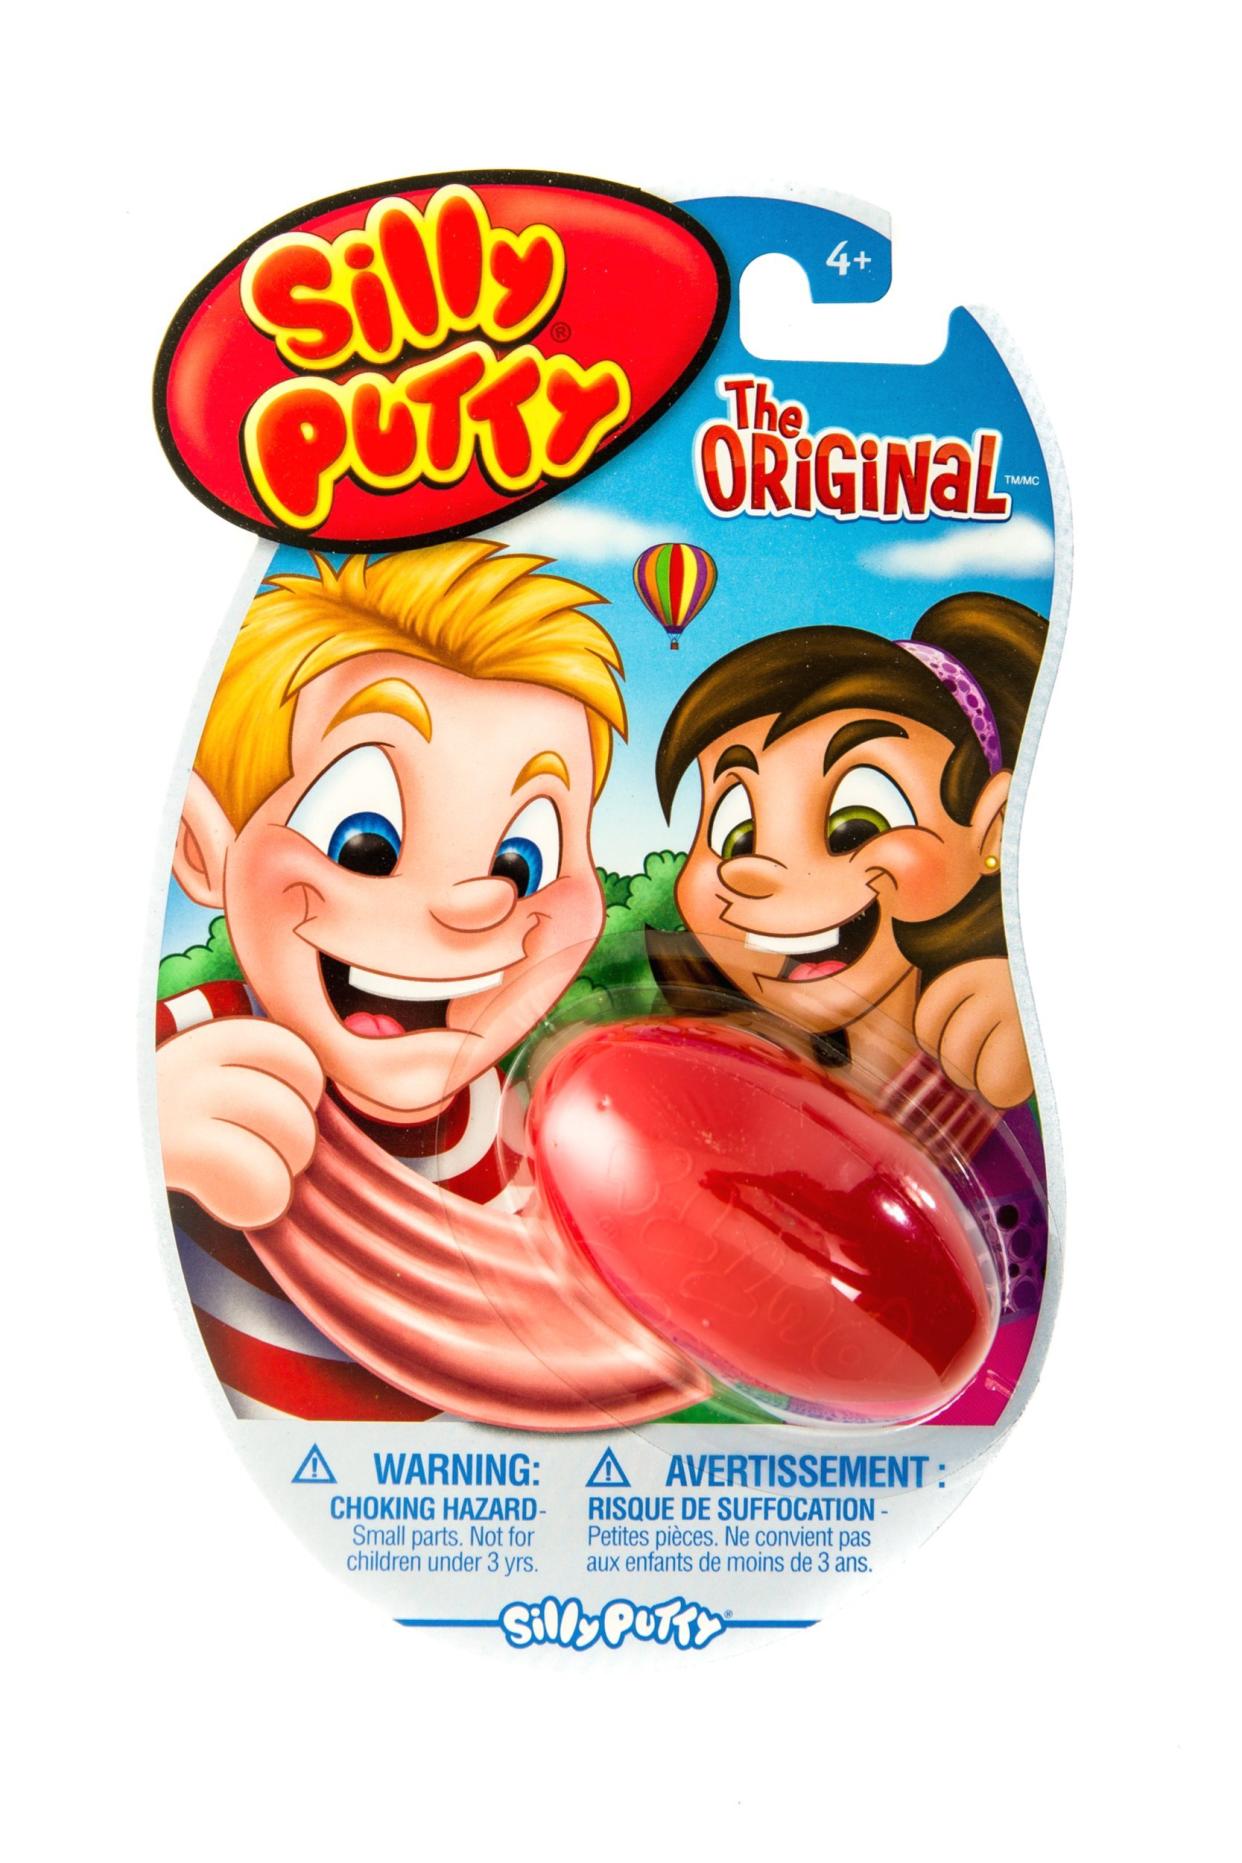 Silly Putty in package